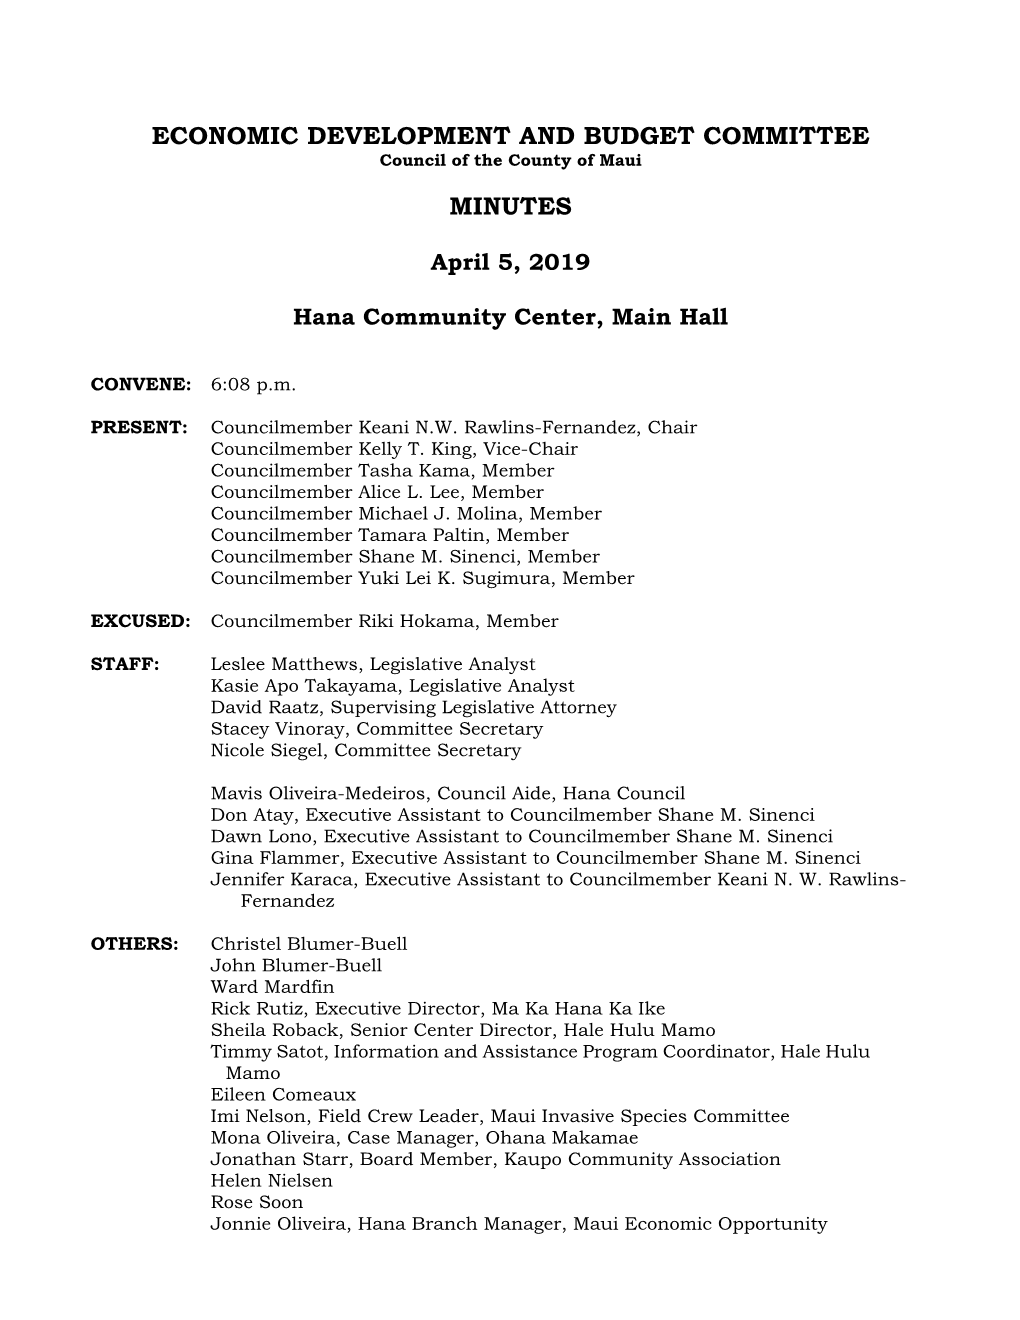 Economic Development and Budget Committee Minutes